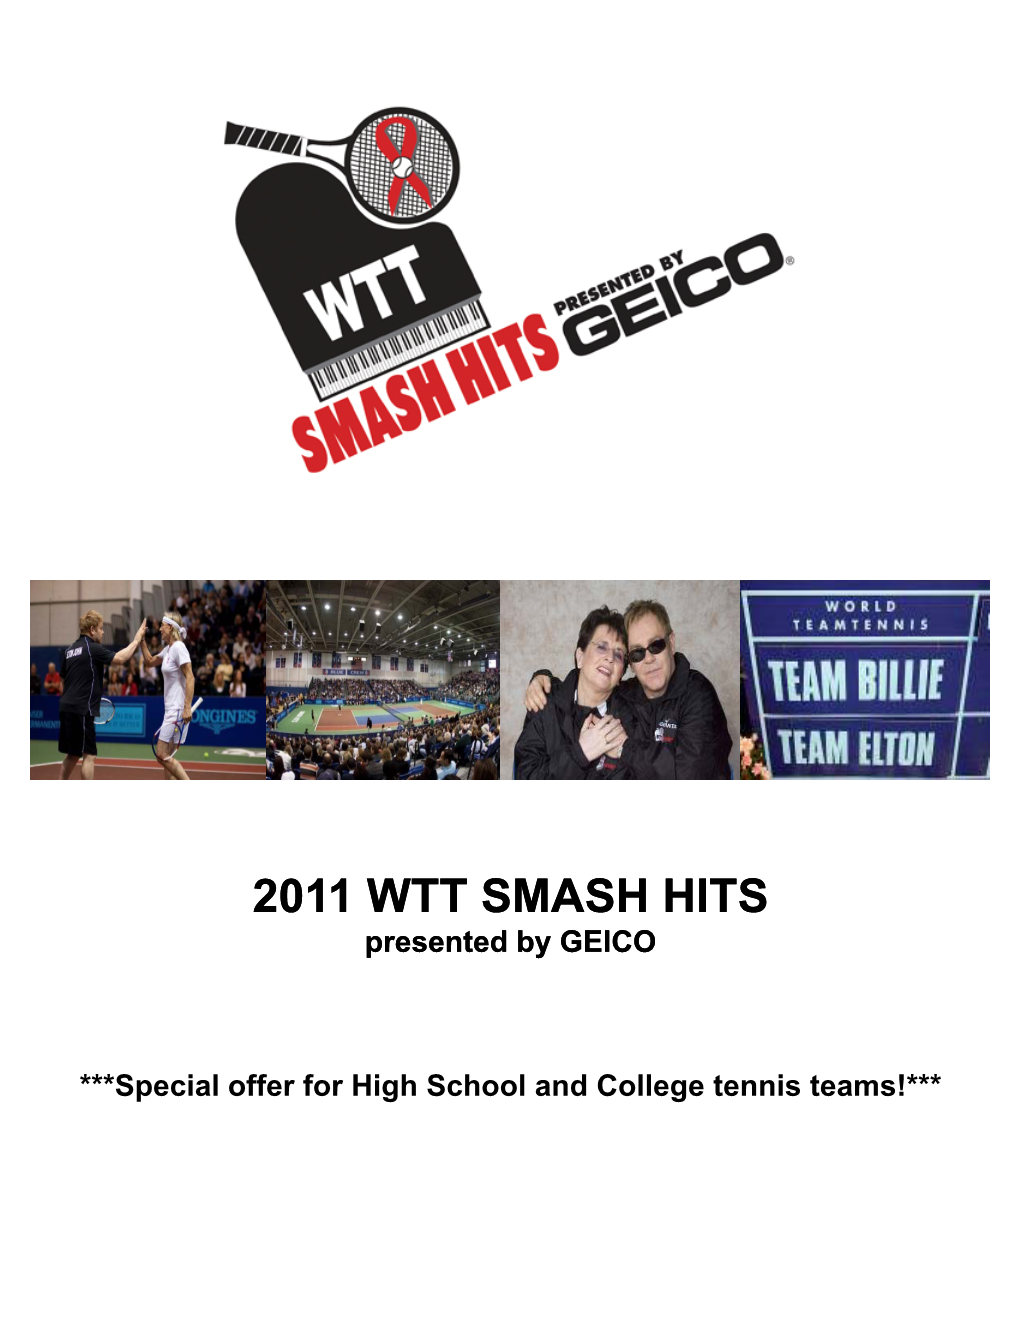 2011 WTT SMASH HITS Presented by GEICO